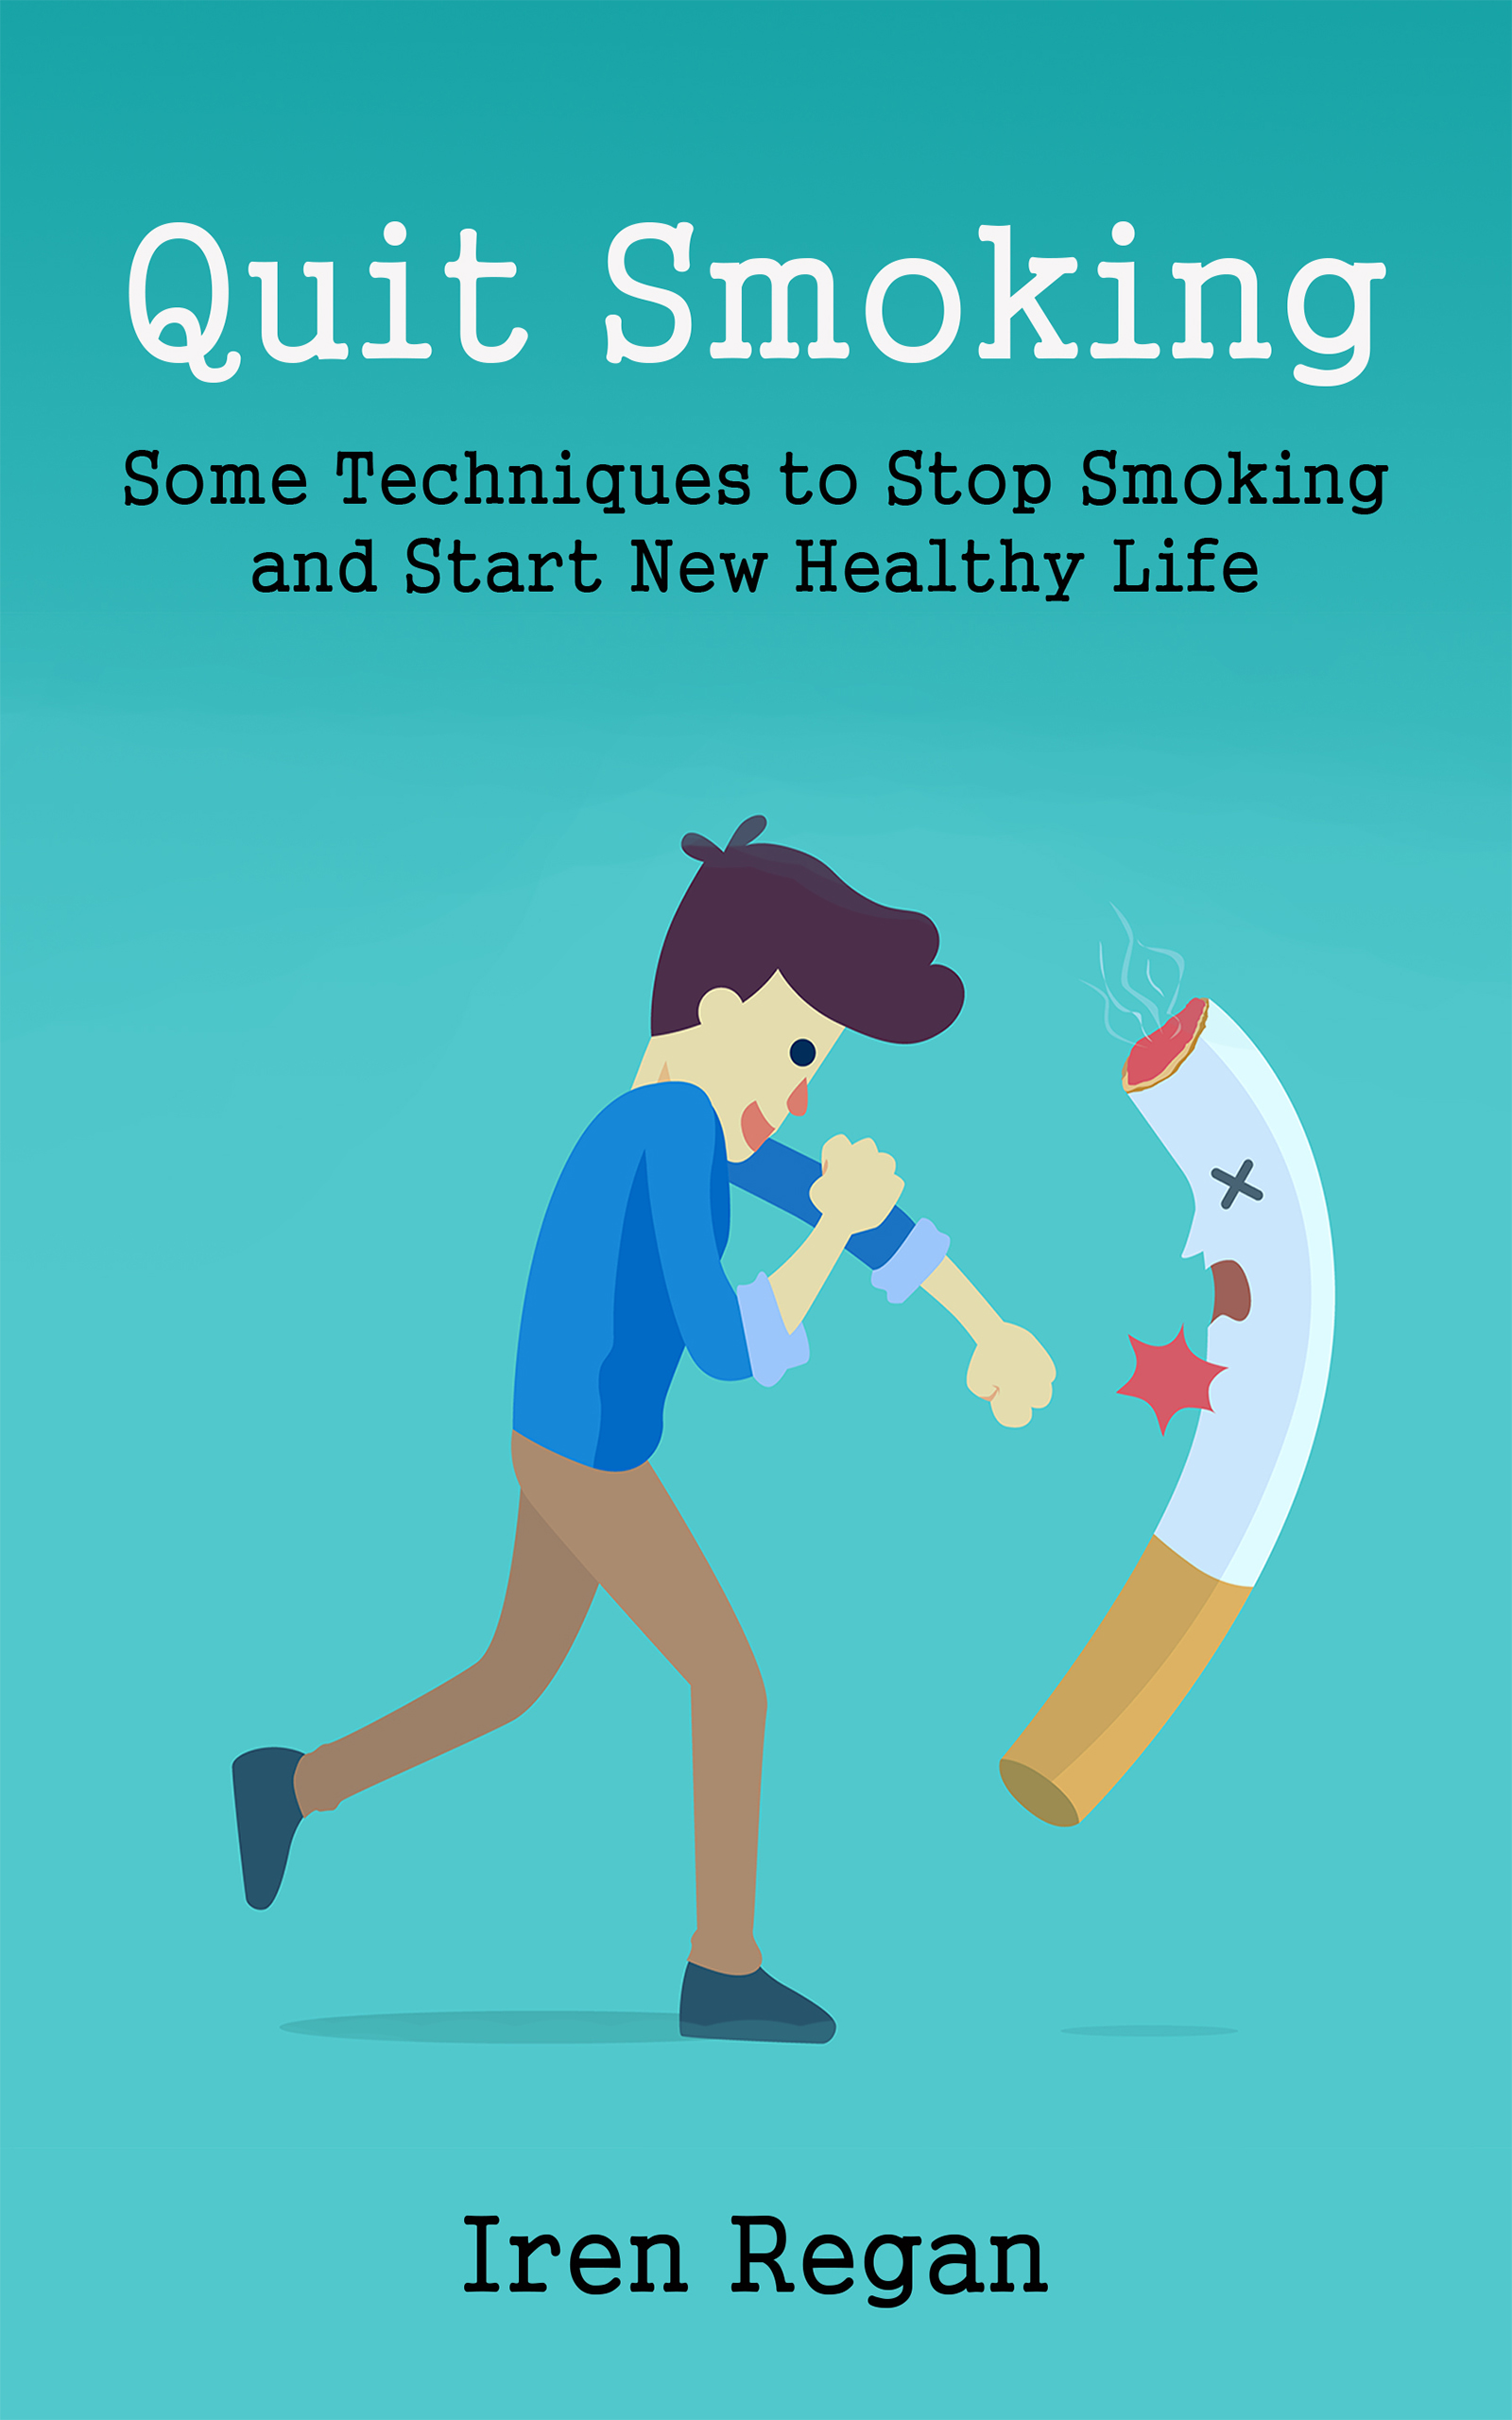 FREE: Quit Smoking Some Techniques to Stop Smoking and Start New Healthy Life by Iren Regan